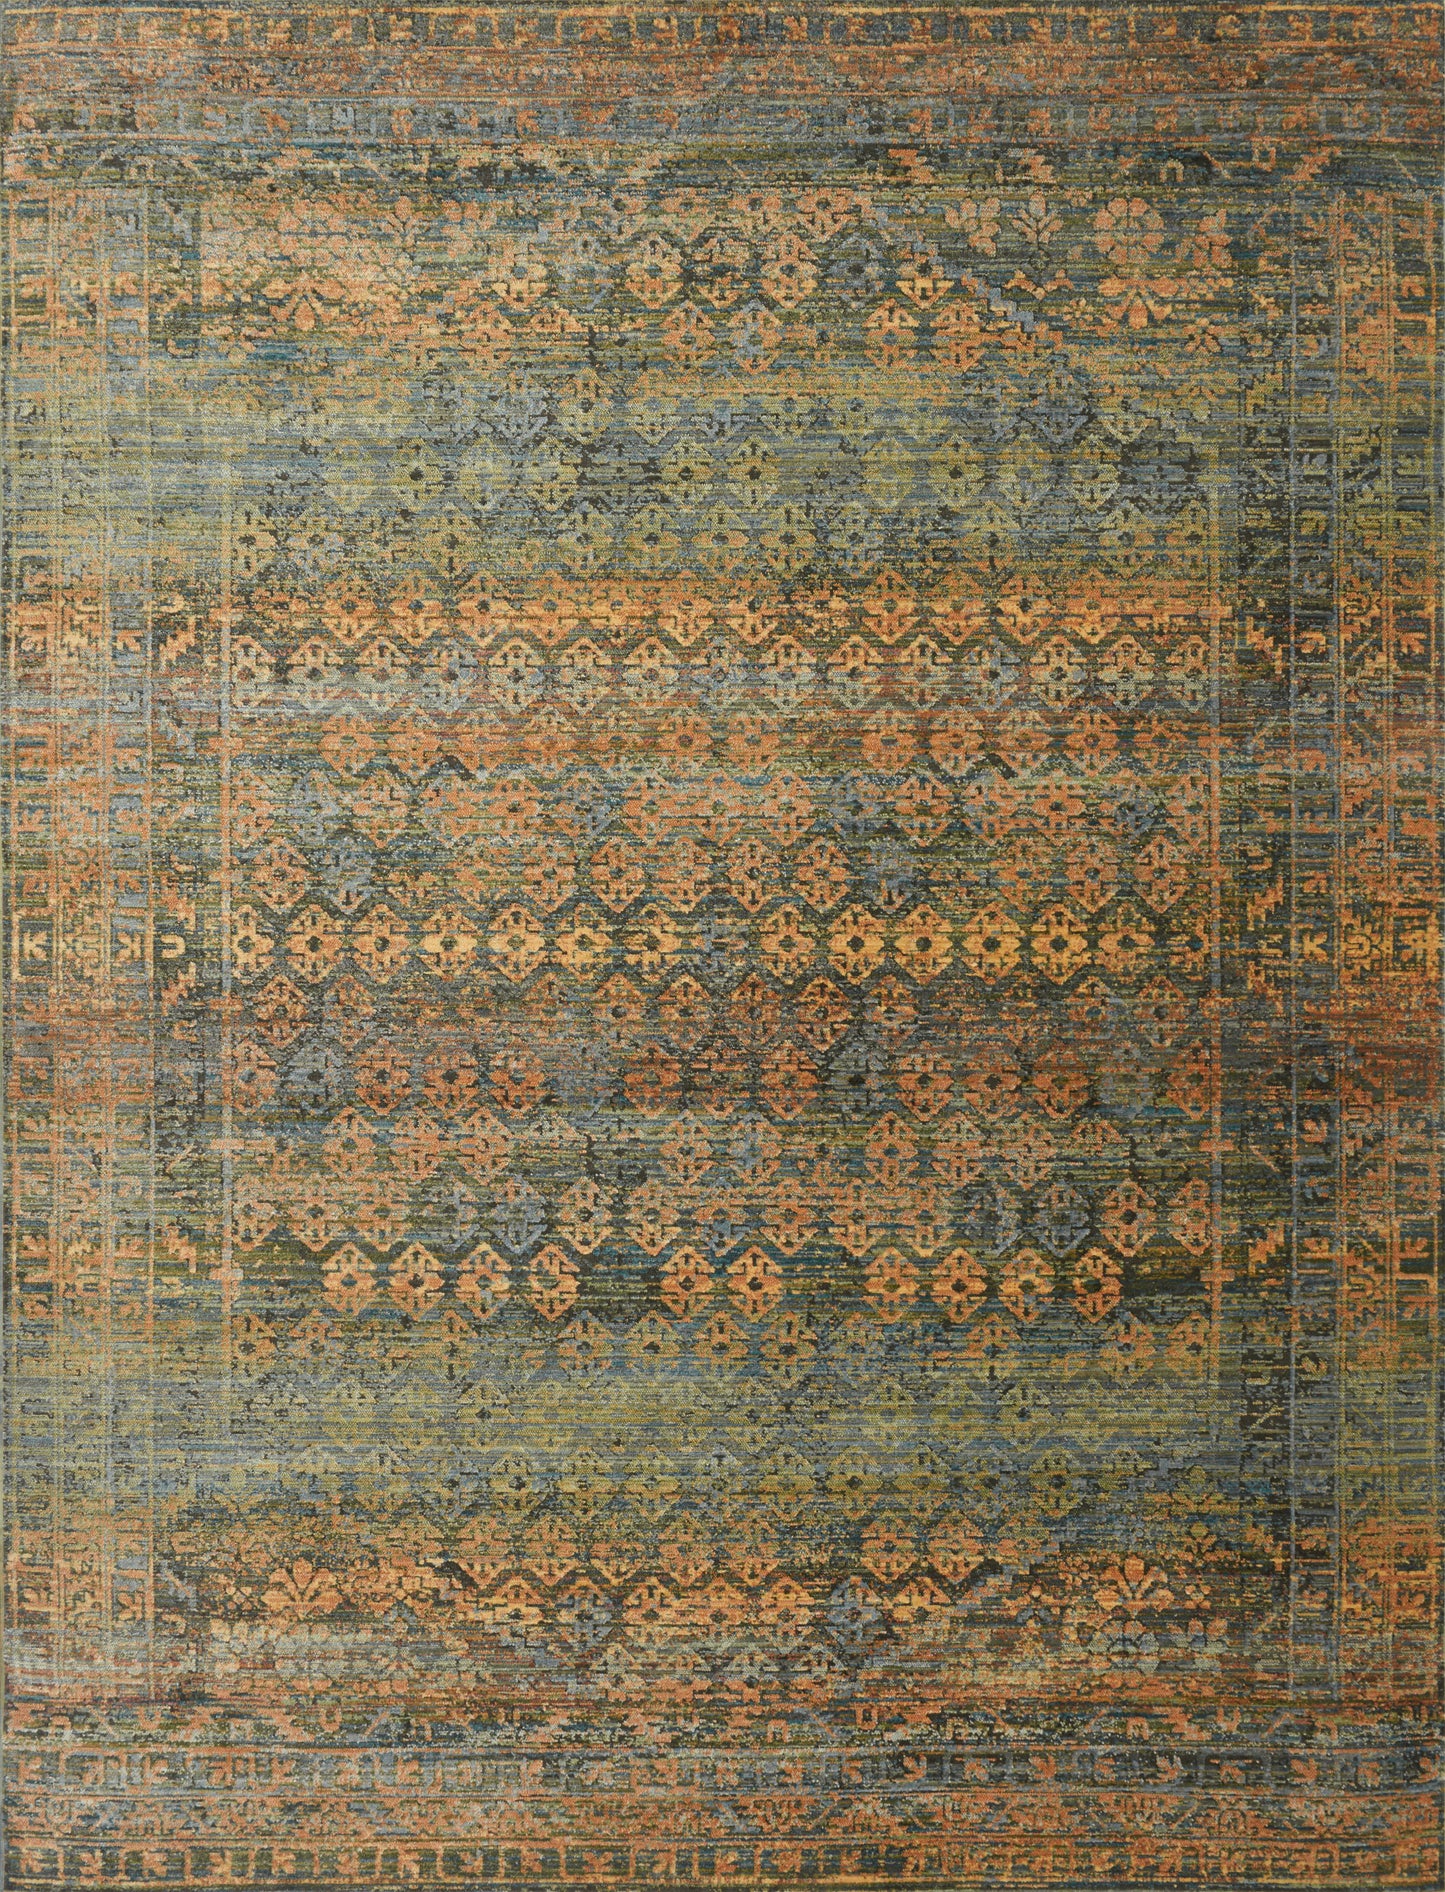 A picture of Loloi's Javari rug, in style JV-03, color Lagoon / Fiesta